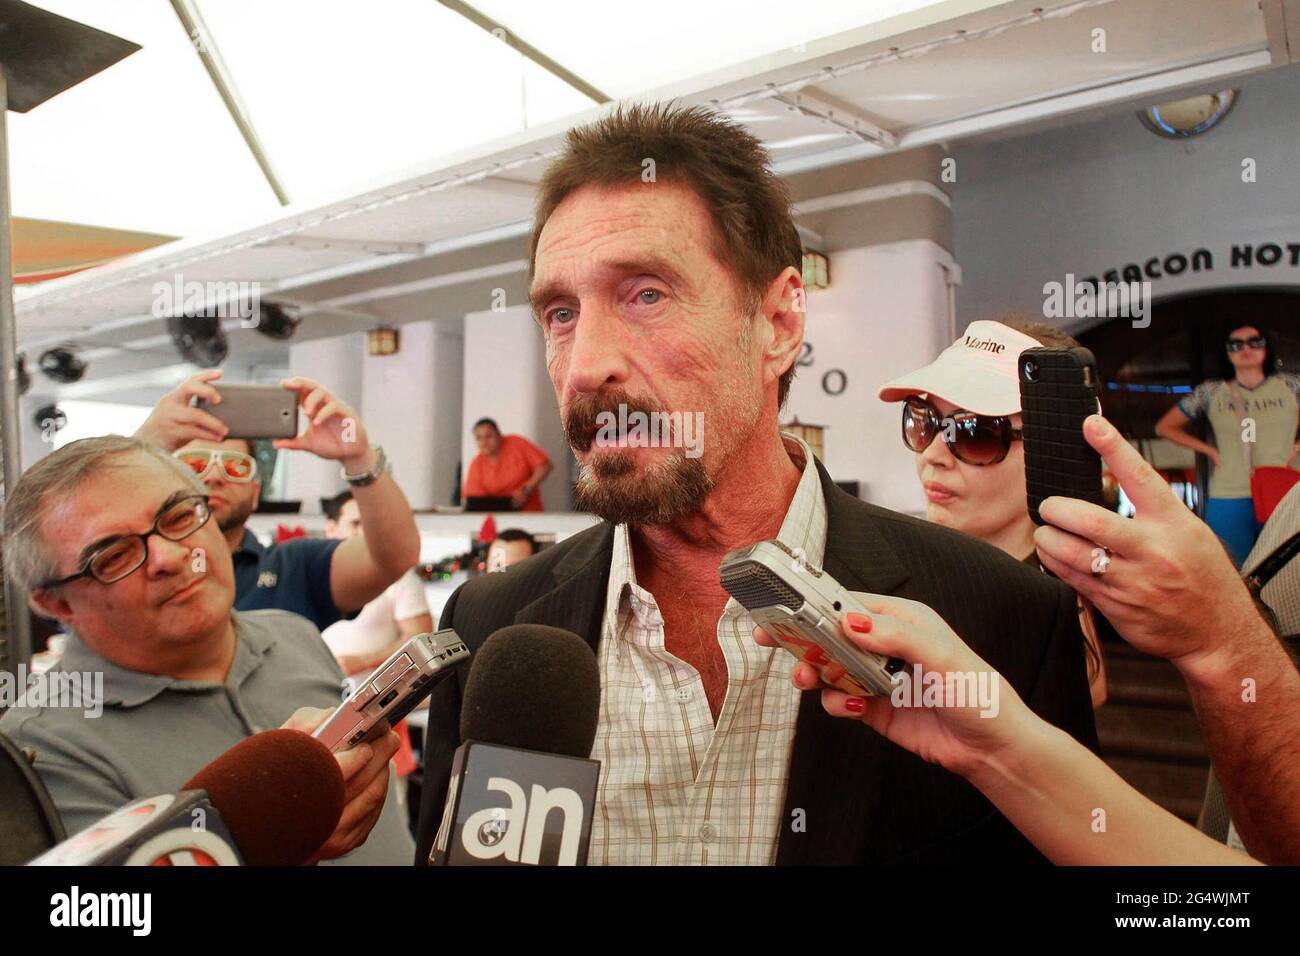 Miami, USA. 13th Dec, 2012. John McAfee speaks to the Miami media outside the Beacon Hotel in Miami, Florida, on December 13, 2012. John McAfee, the controversial guru of computer anti-virus software, denied Thursday in Miami Beach that he's been interviewed by Internal Revenue Service and FBI agents after arriving the previous night following deportation from Guatemala. (Photo by C.M. Guerrero/Miami Herald/MCT/Sipa USA) Credit: Sipa USA/Alamy Live News Stock Photo